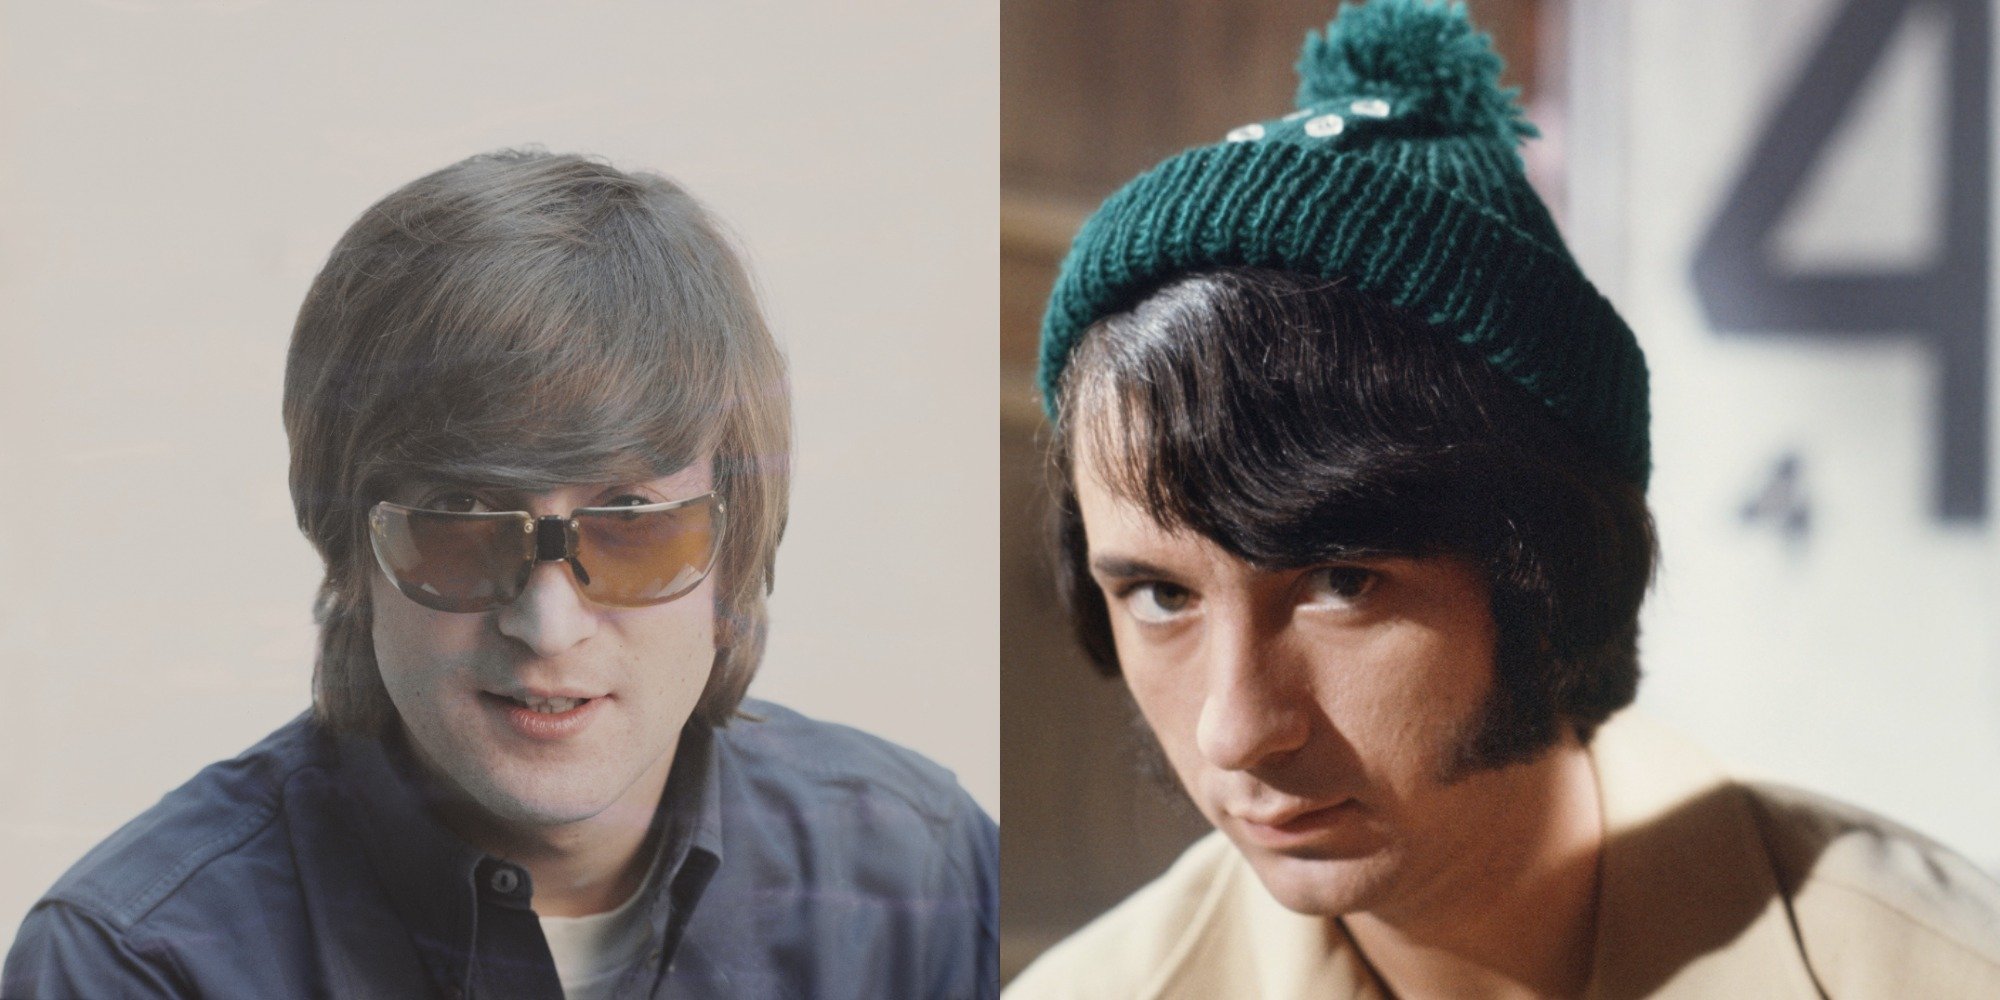 John Lennon and Mike Nesmith in a set of side-by-side photographs.